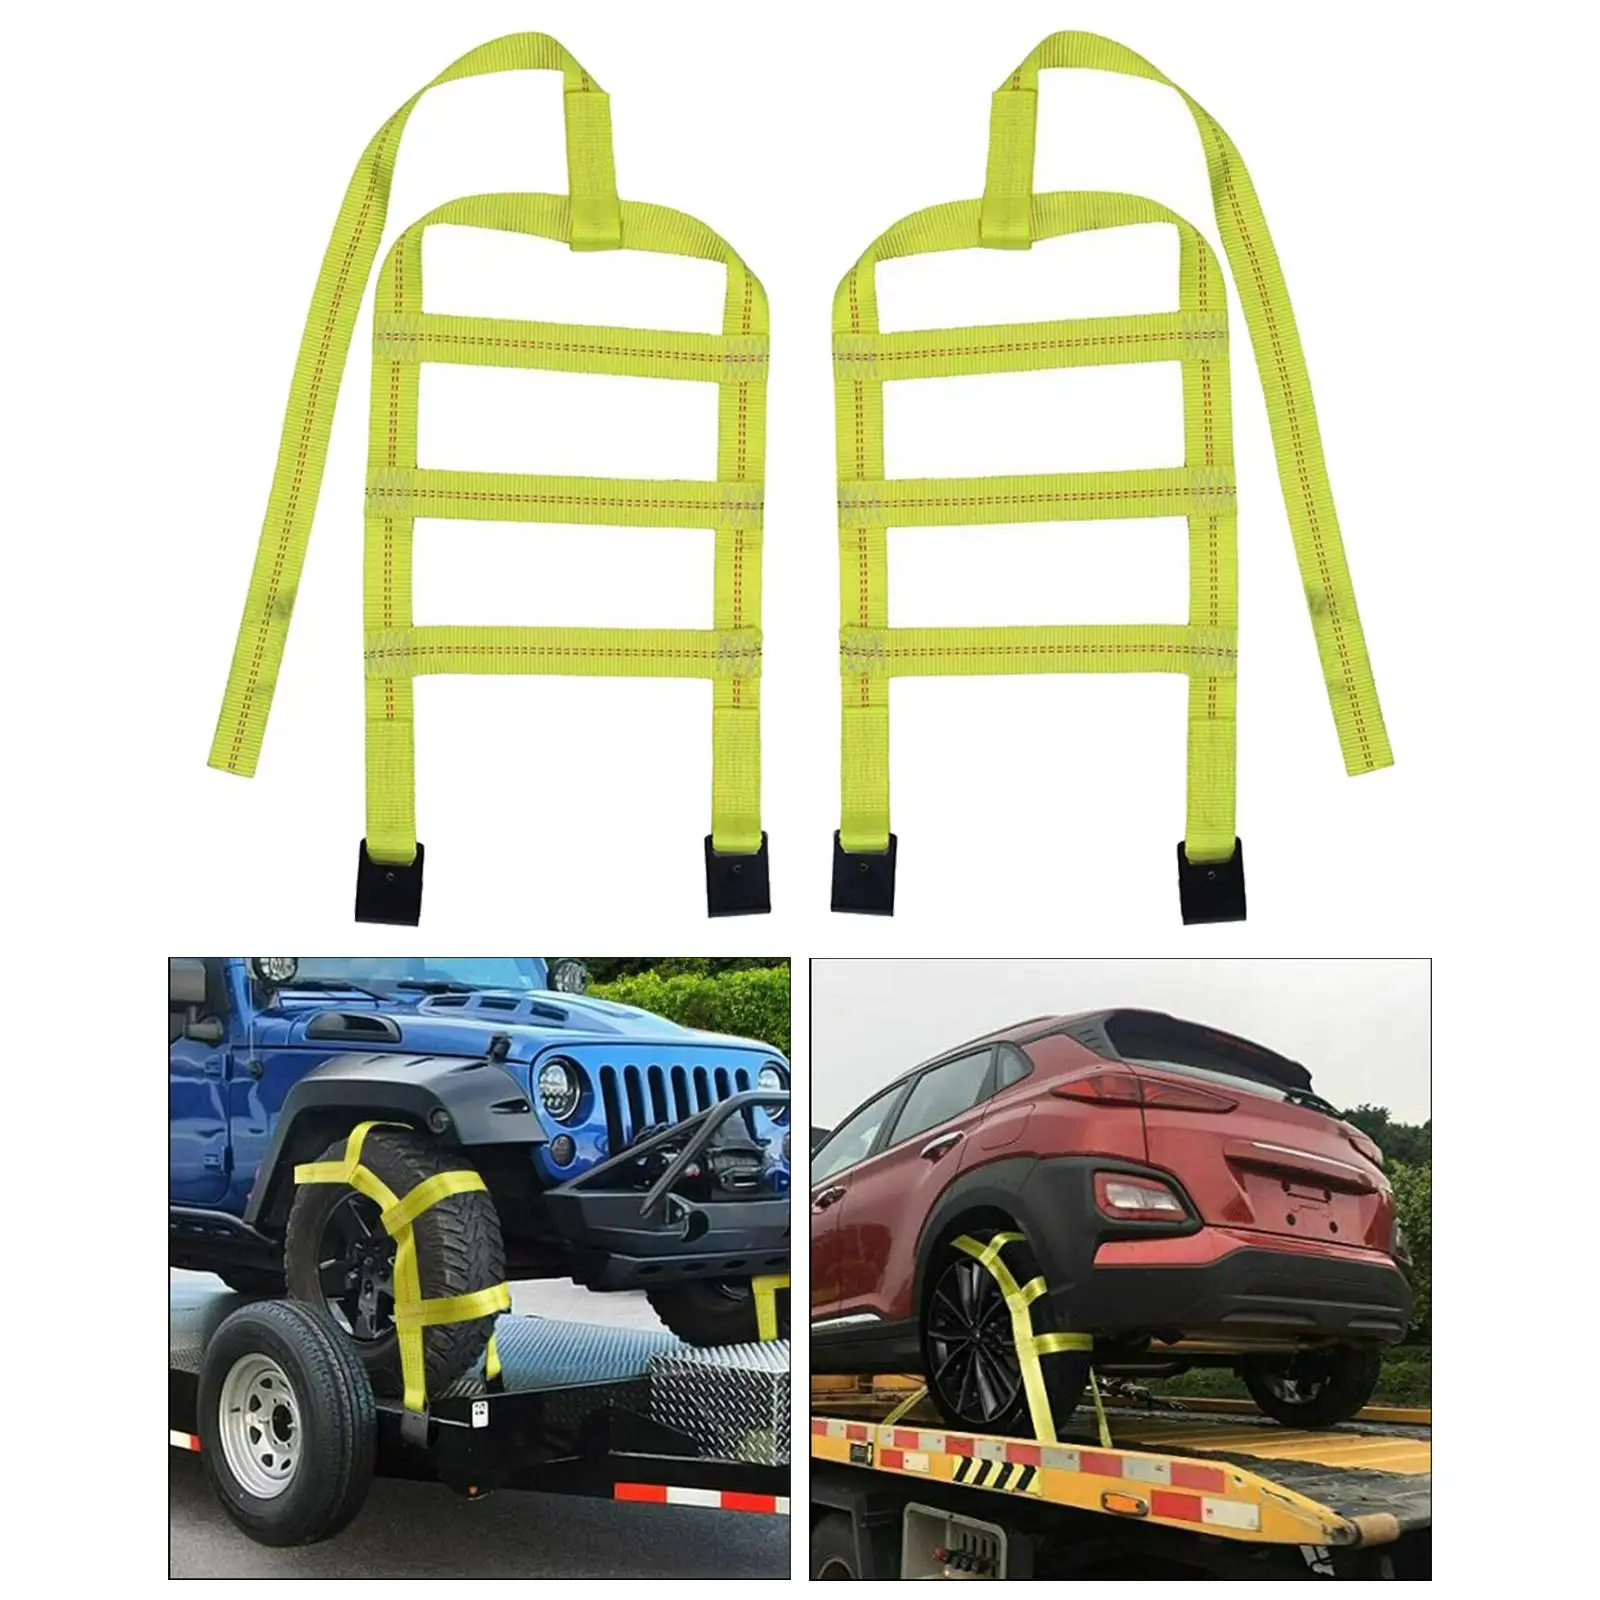 Tow Straps Universal Yellow Wheel Net Set Heavy Duty Car Basket Straps Car Tire Tow Straps Fit for 14-17inch Tires